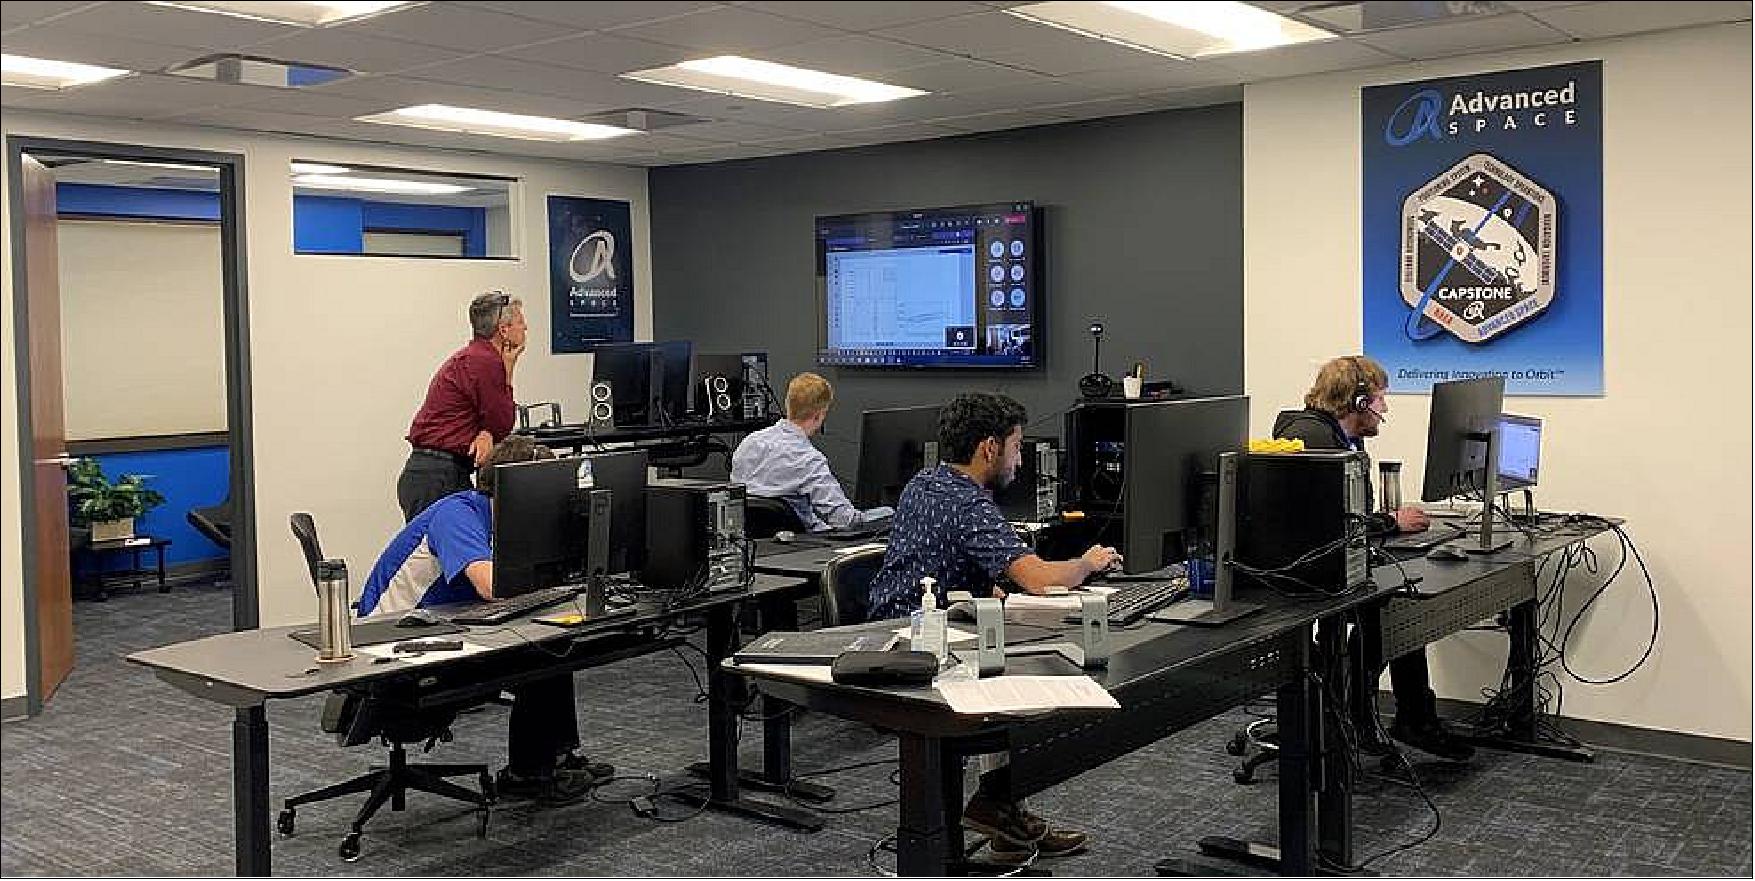 Figure 7: The team at Advanced Space, NASA's partner, performs the third operations readiness test at its CAPSTONE mission operations center in Westminster, Colorado. The team conducted simulated spacecraft trajectory and correction maneuvers necessary to perform spacecraft insertion into its final lunar orbit (image credit: Advanced Space)